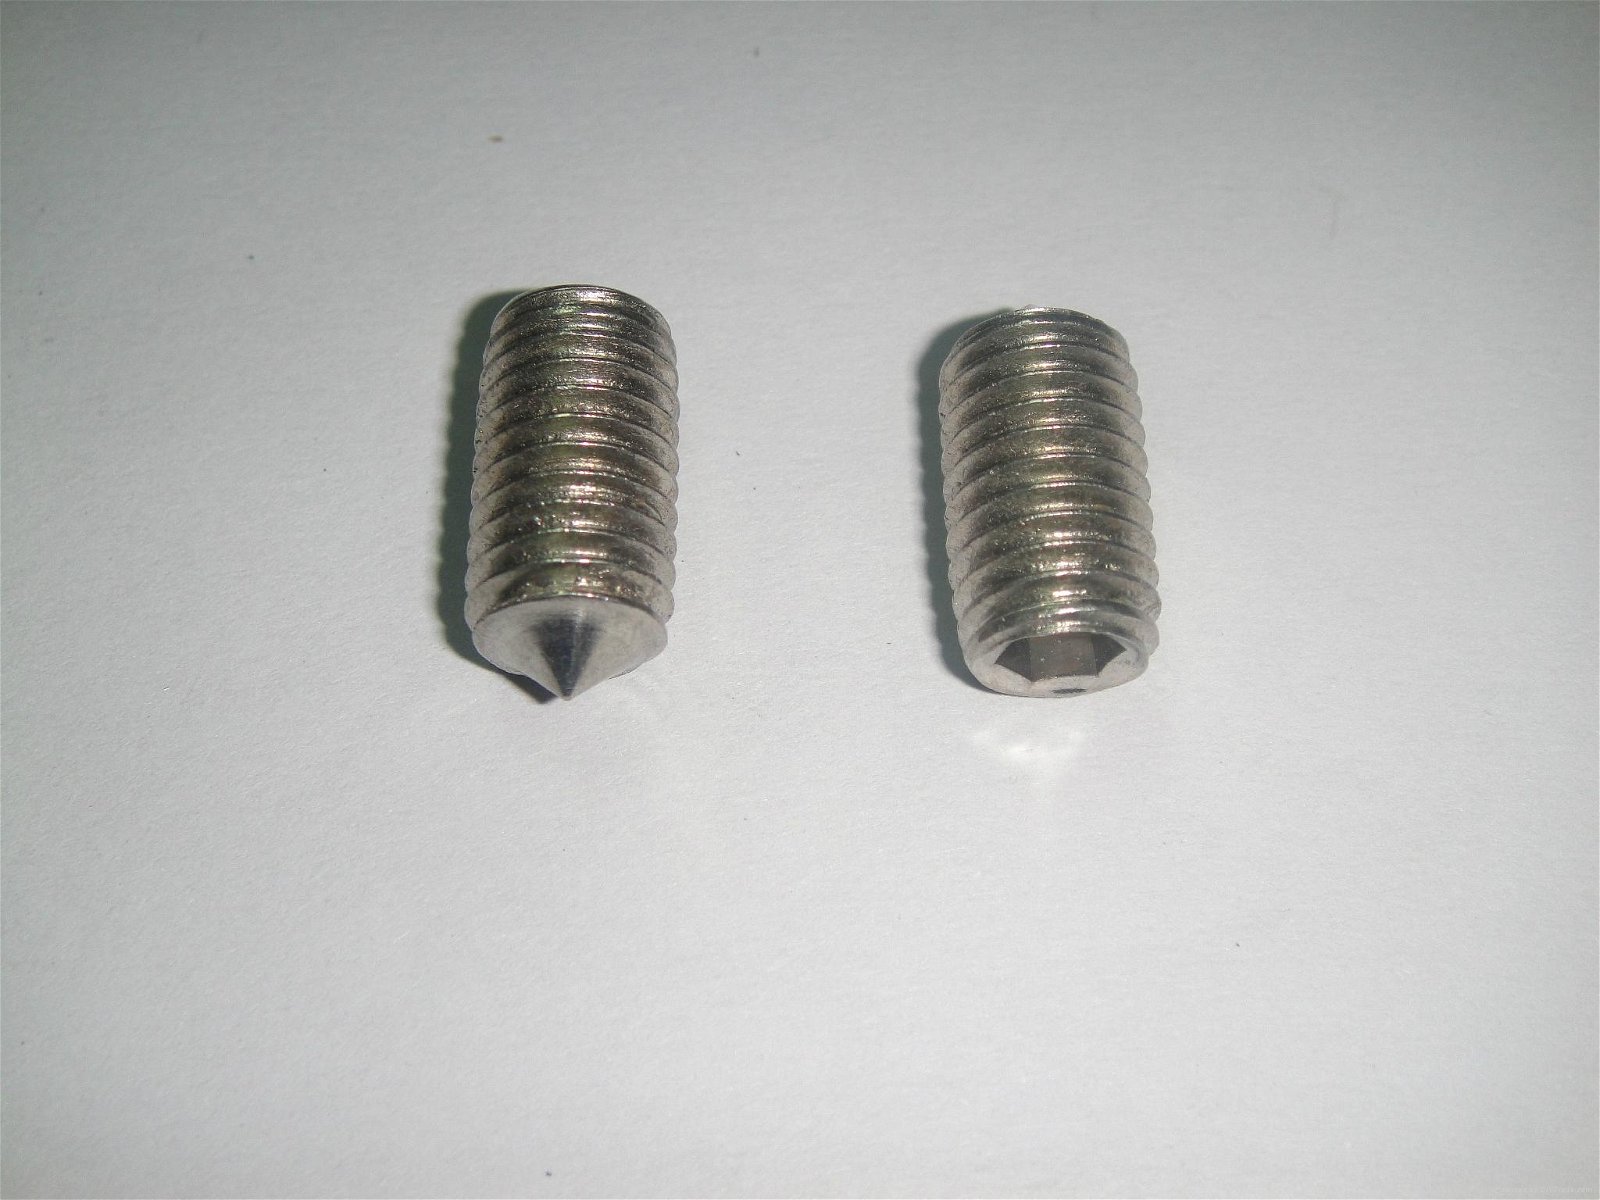 Hexagon sodket set screw with cone point